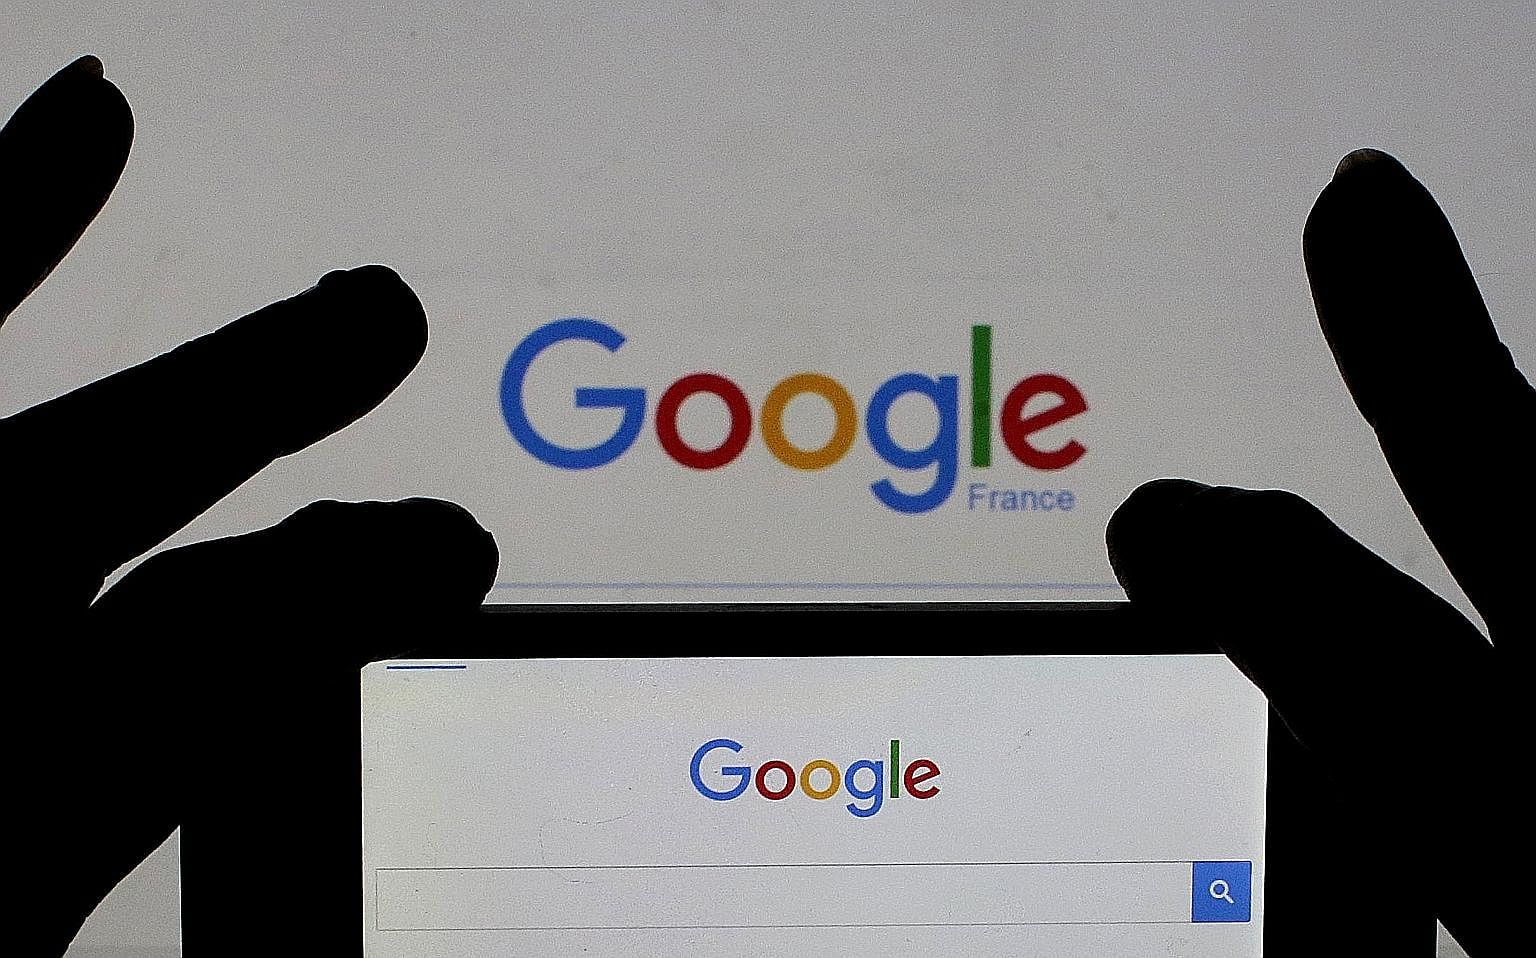 Google is using technology to control what European users can see in response to a tightening of the EU's "right to be forgotten" privacy laws.